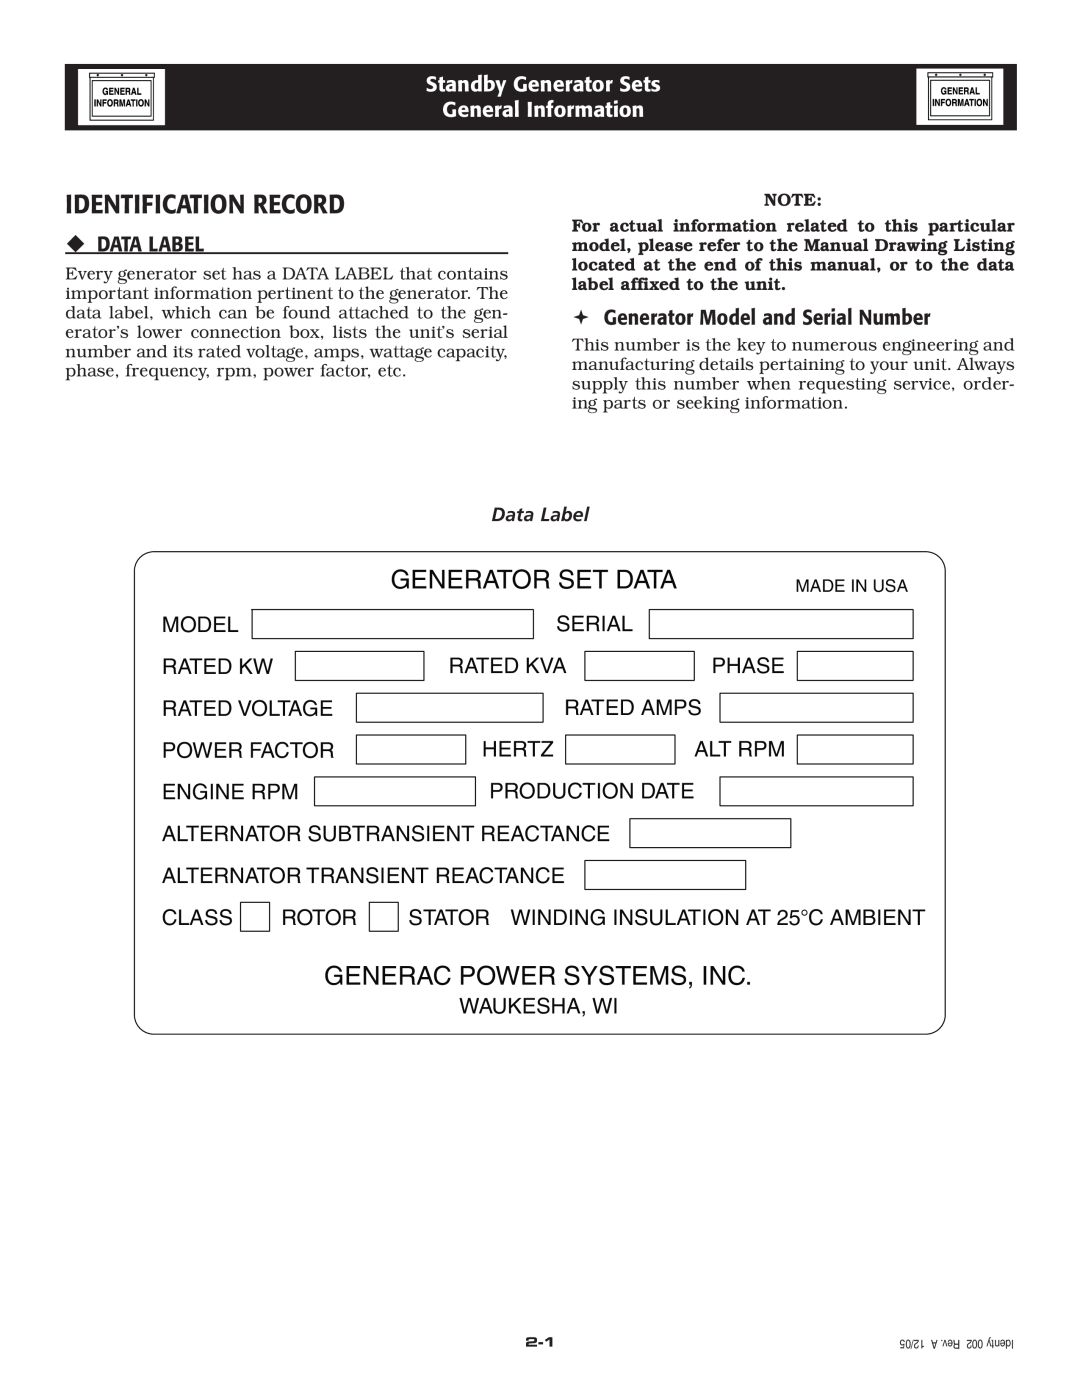 Generac Power Systems 005262-1 owner manual Identification Record, Standby Generator Sets General Information, ‹ Data Label 